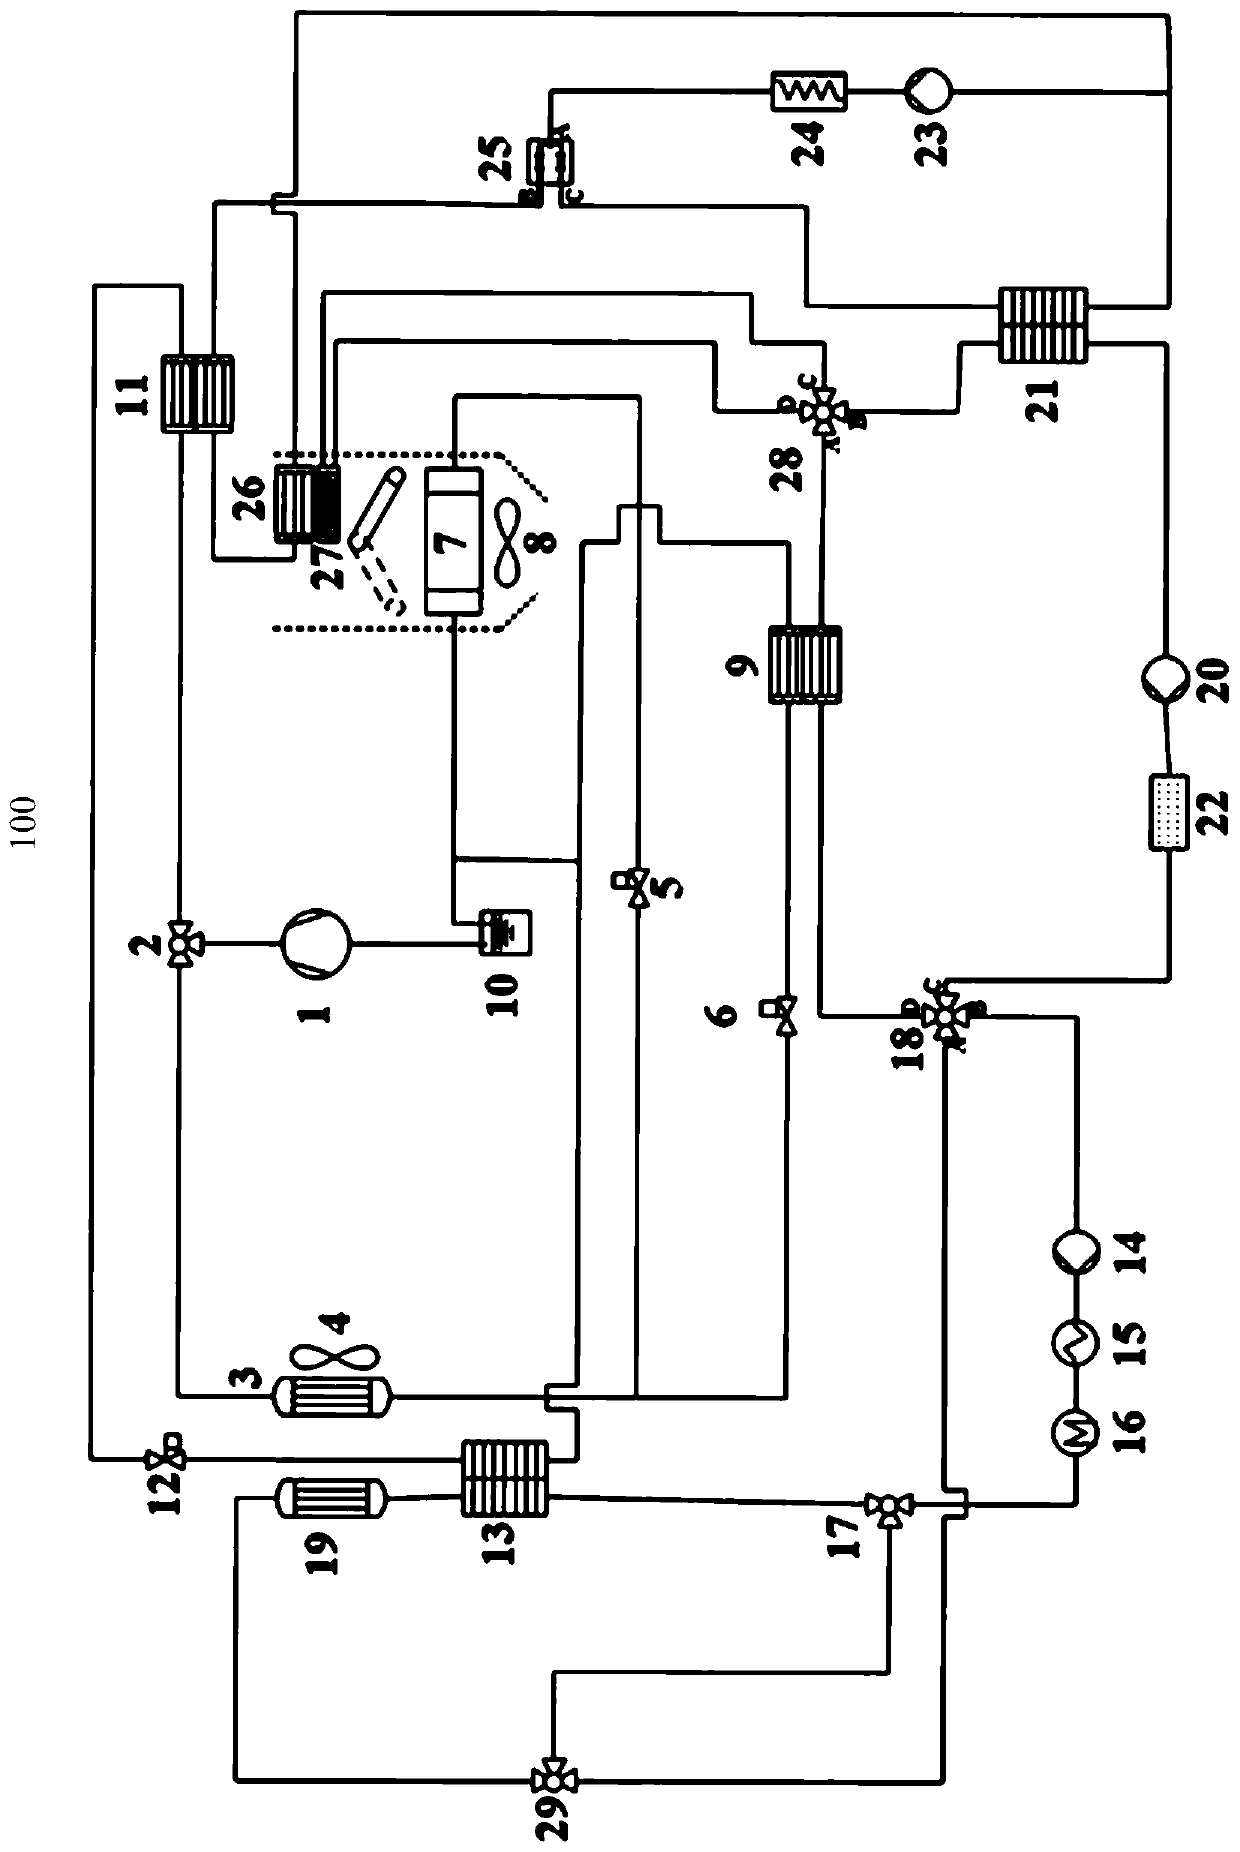 Heat management system for electric vehicle